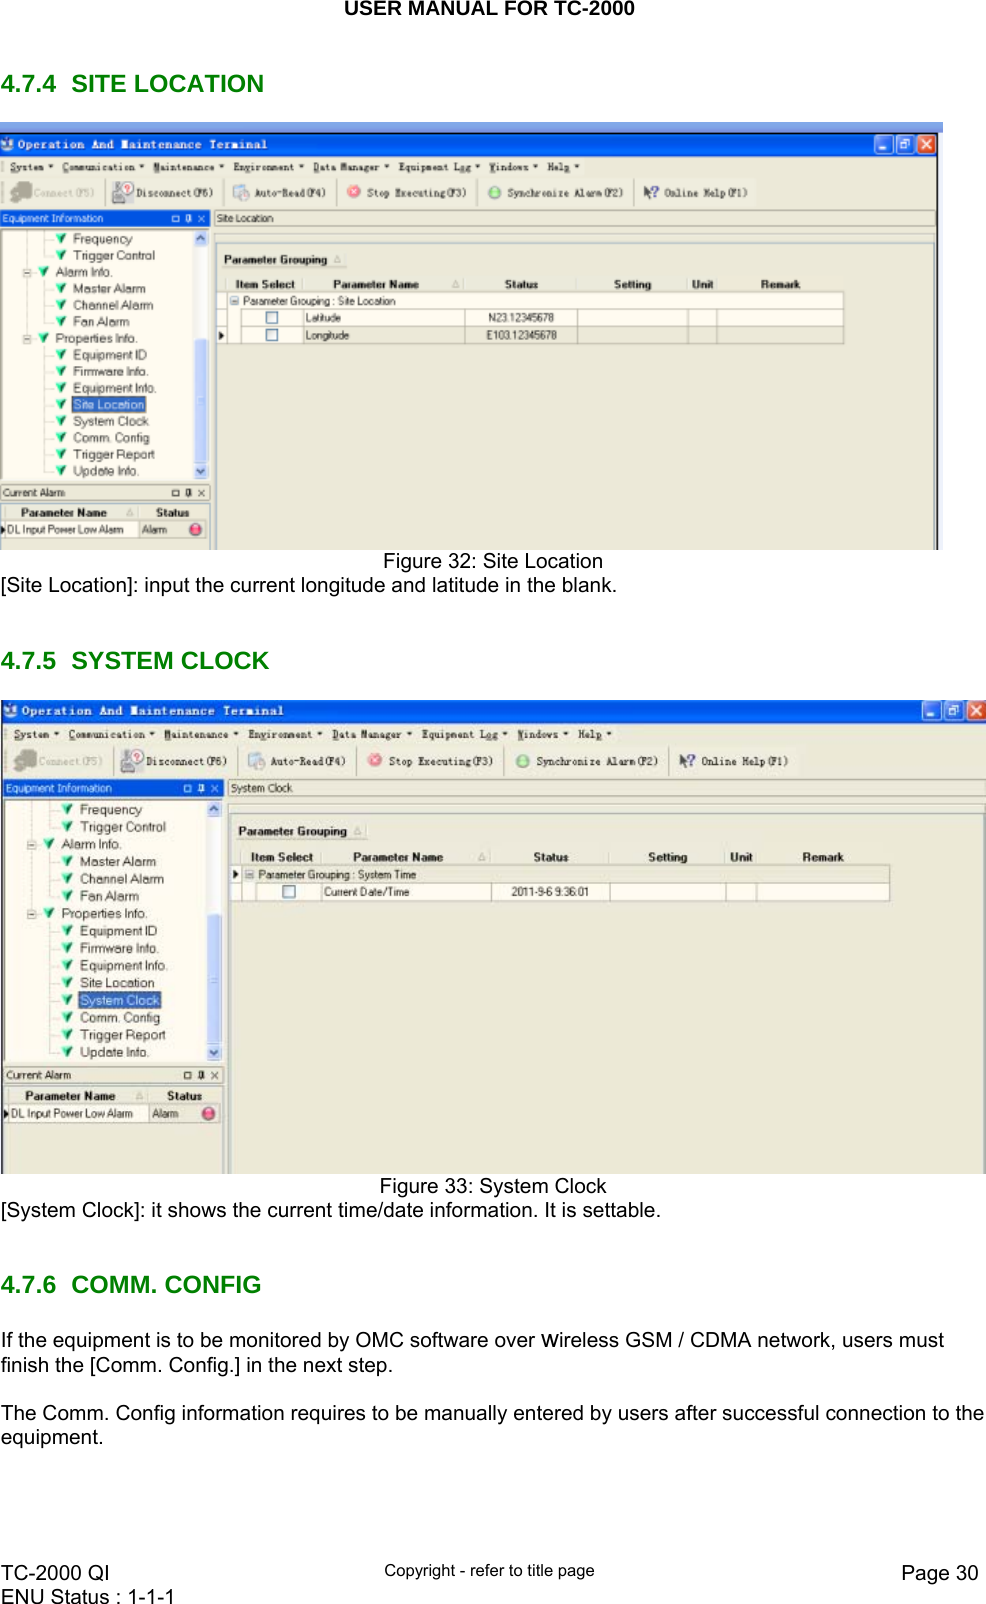 USER MANUAL FOR TC-2000   TC-2000 QI  Copyright - refer to title page  Page 30ENU Status : 1-1-1    4.7.4 SITE LOCATION  Figure 32: Site Location [Site Location]: input the current longitude and latitude in the blank.   4.7.5 SYSTEM CLOCK  Figure 33: System Clock [System Clock]: it shows the current time/date information. It is settable.   4.7.6 COMM. CONFIG If the equipment is to be monitored by OMC software over wireless GSM / CDMA network, users must finish the [Comm. Config.] in the next step.  The Comm. Config information requires to be manually entered by users after successful connection to the equipment.  